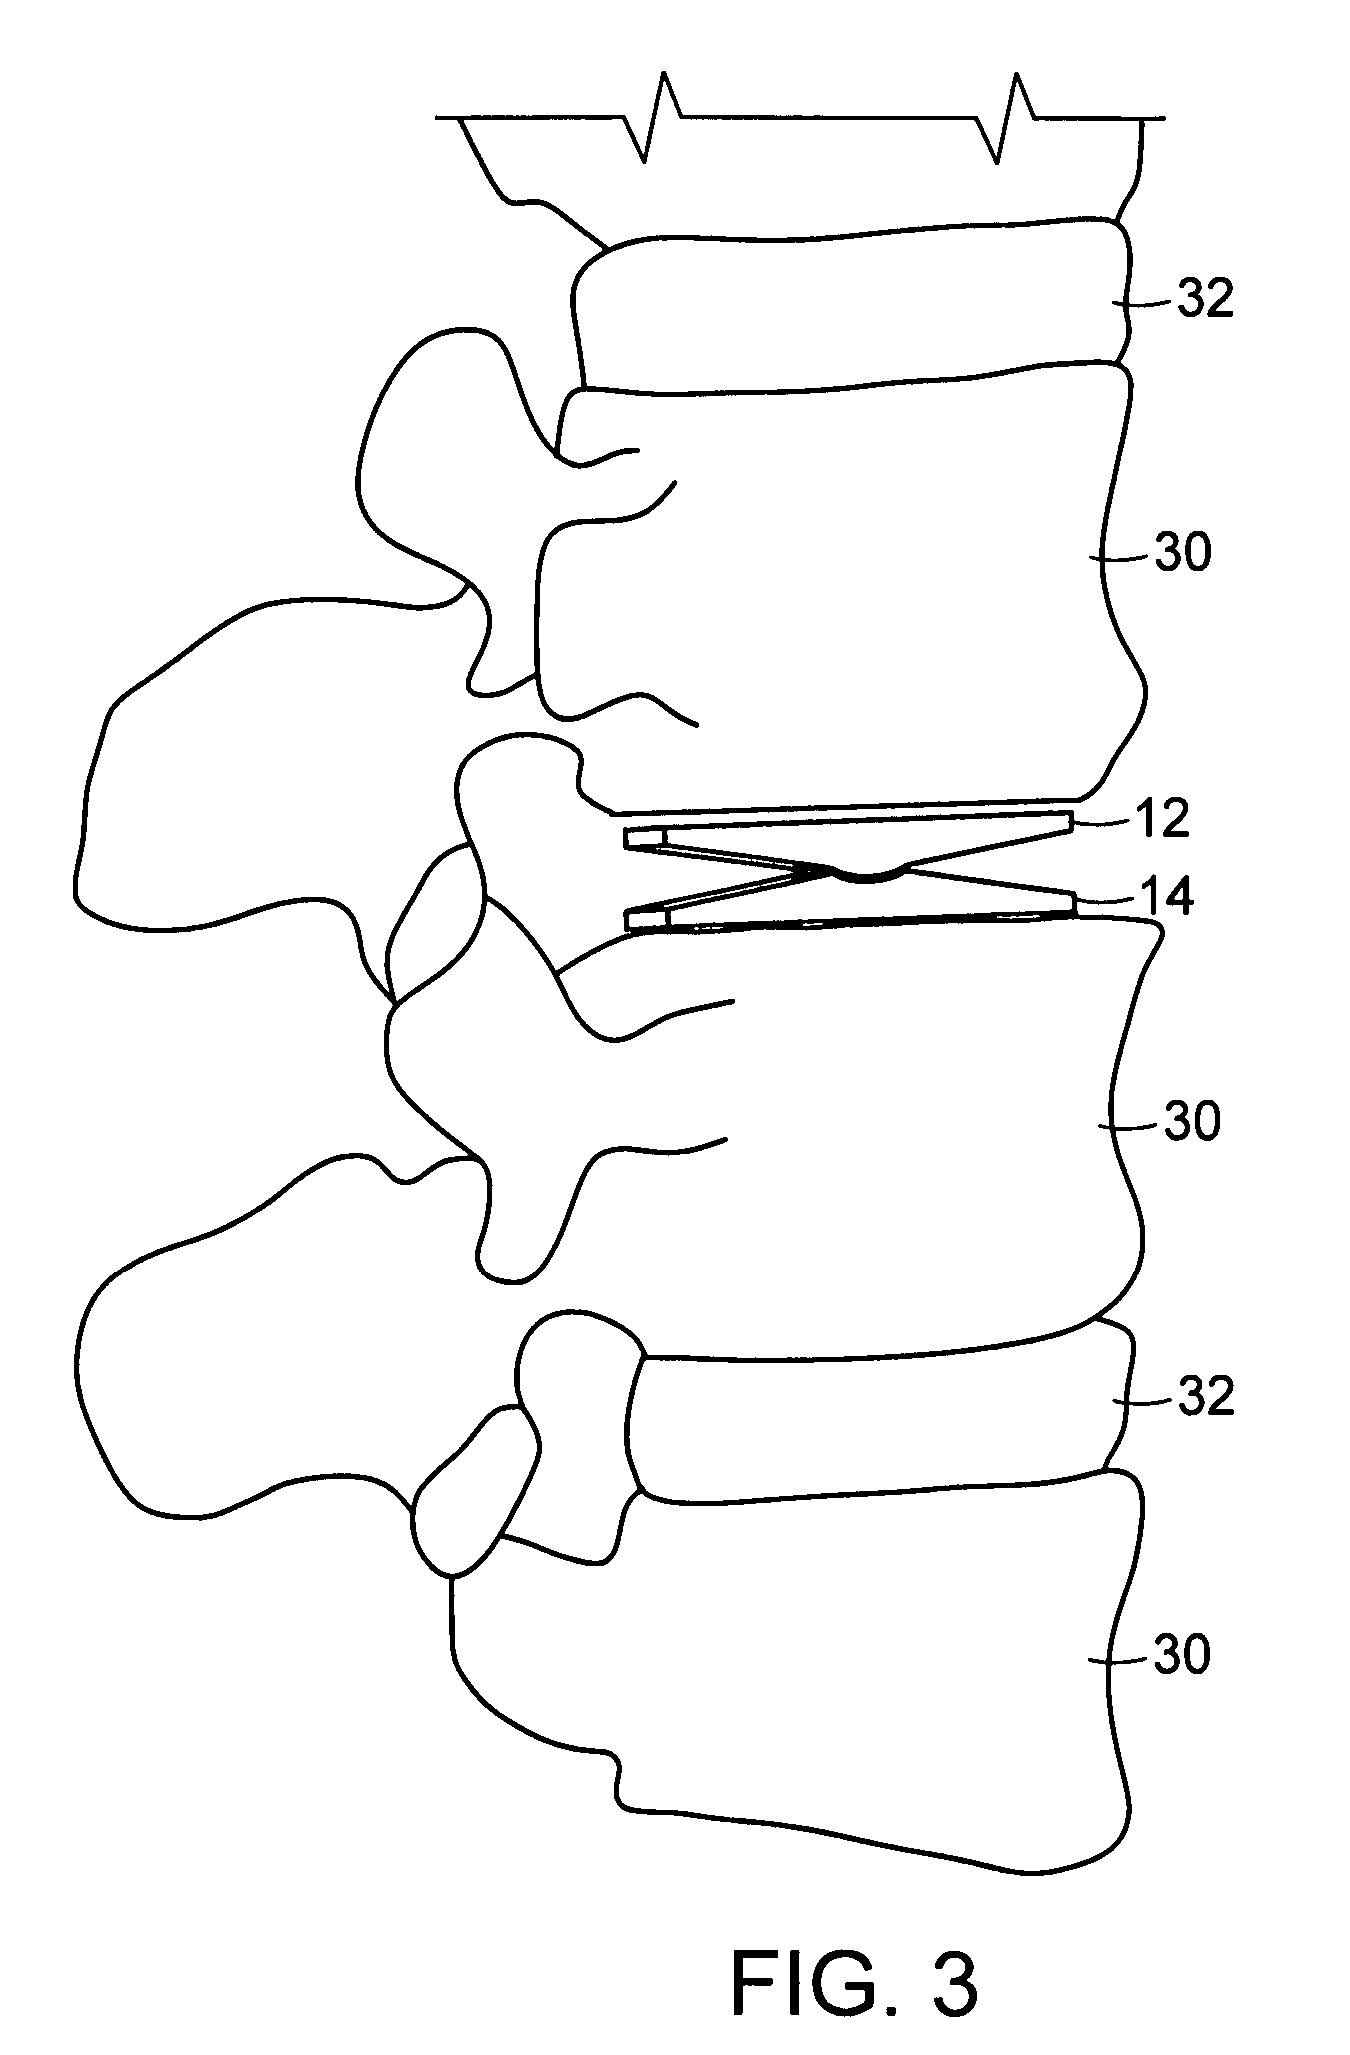 Minimally invasive spinal disc stabilizer and insertion tool